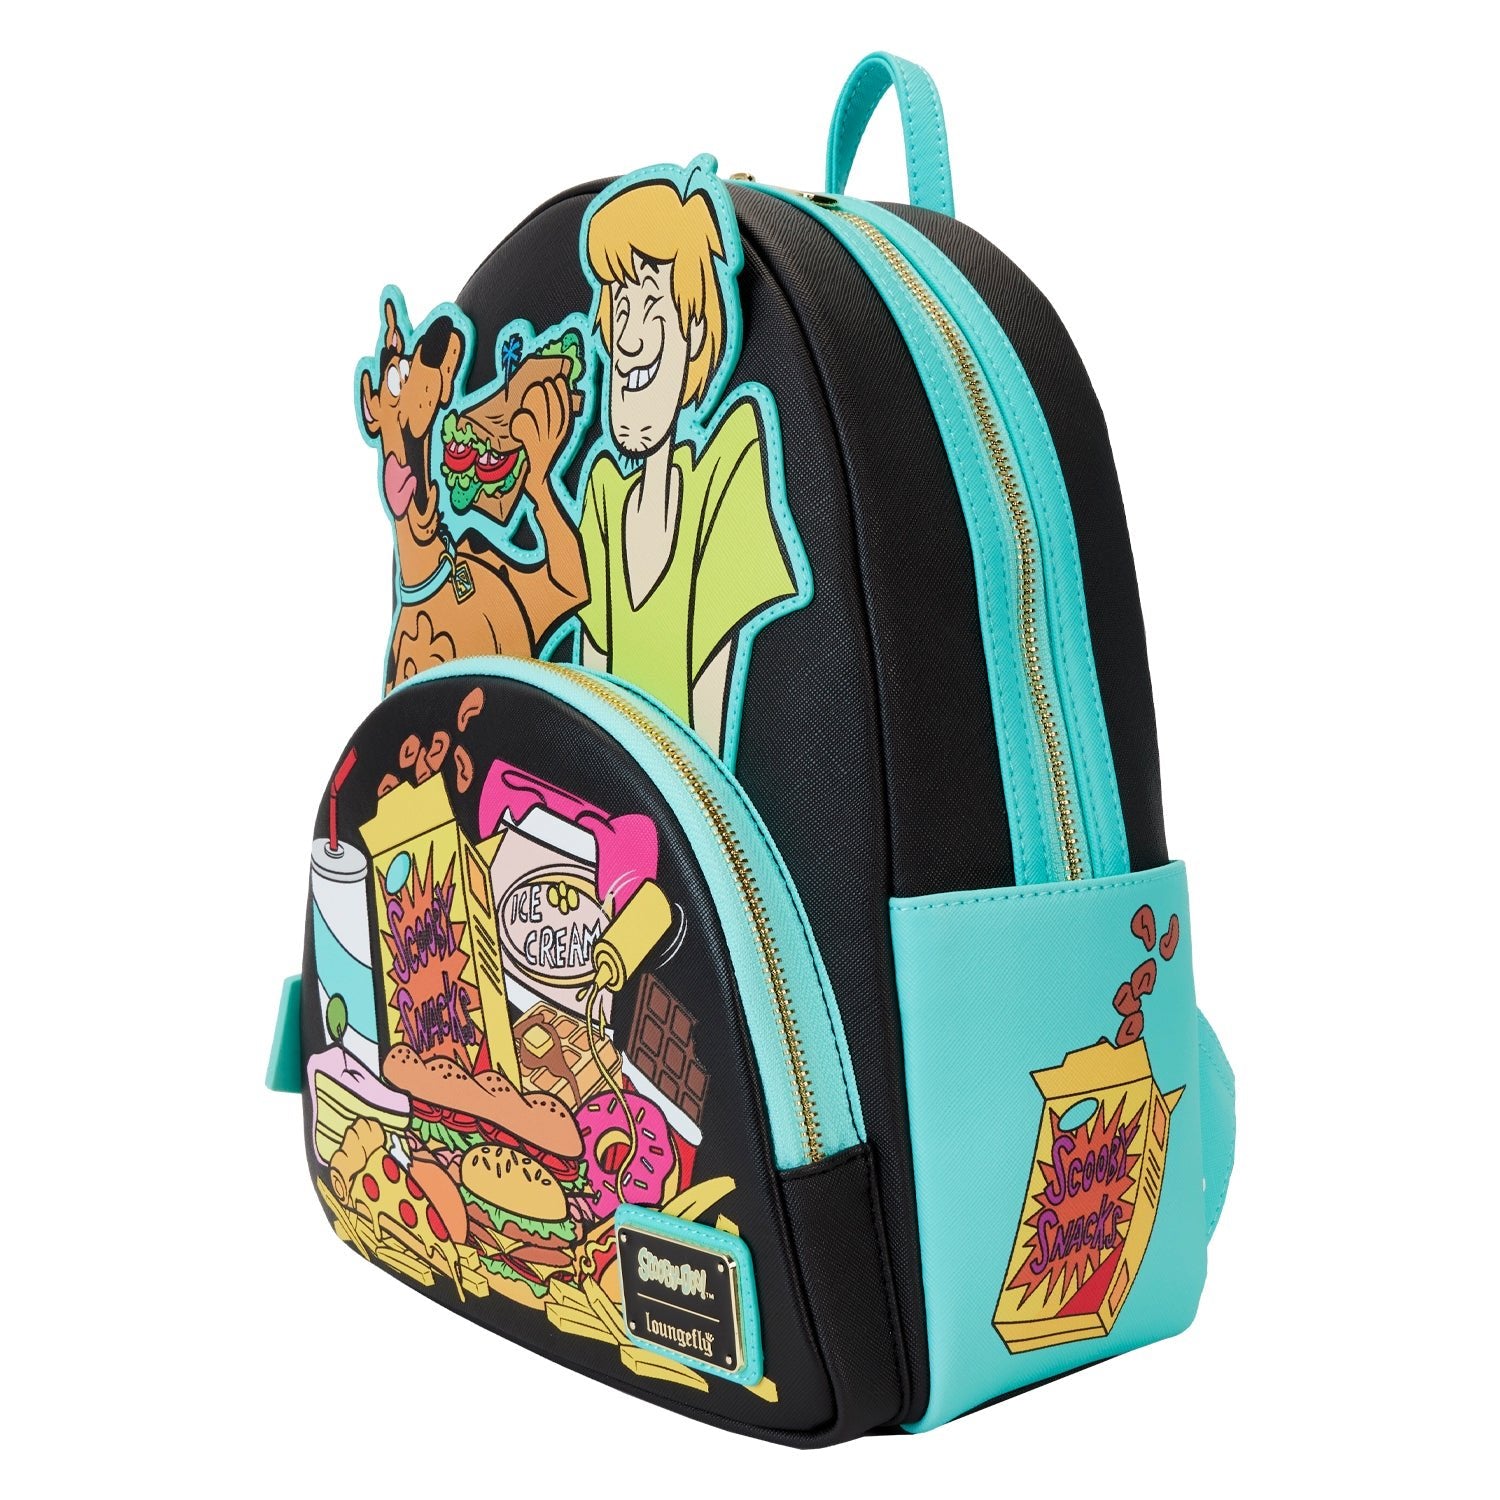 Loungefly x Scooby Doo Munchies Mini Backpack - GeekCore